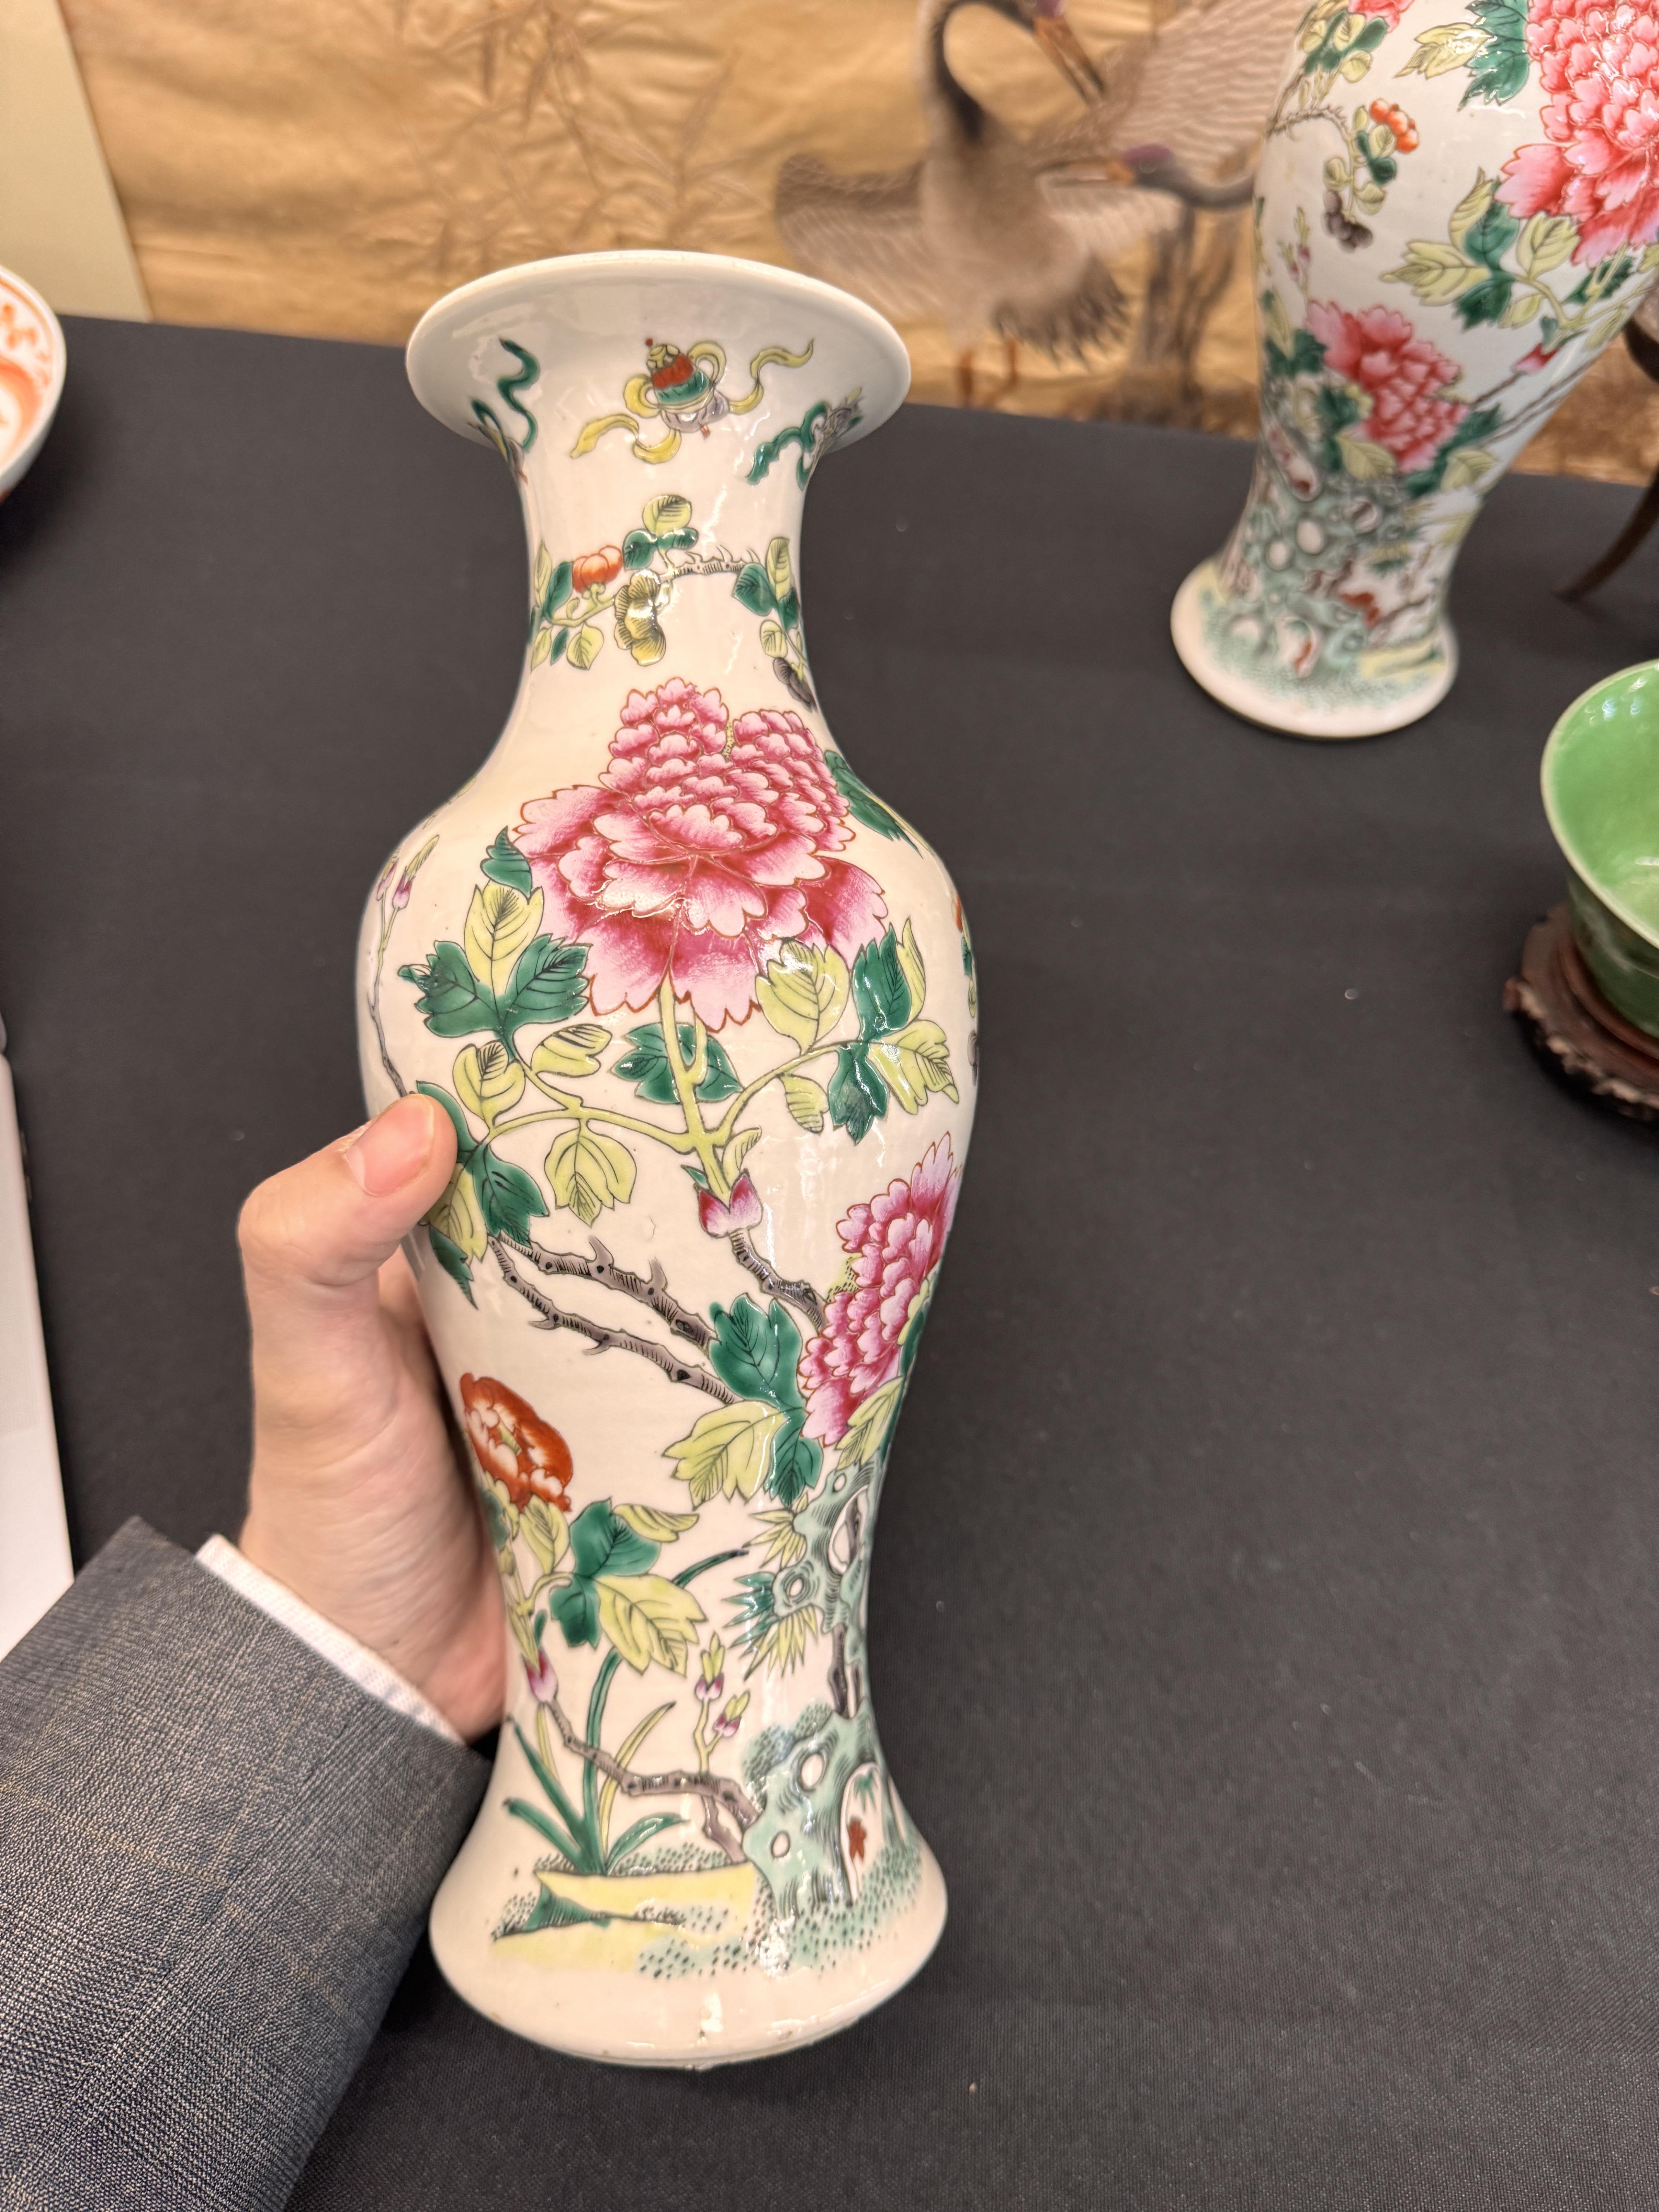 A PAIR OF CHINESE FAMILLE-ROSE 'PEONY' VASES 清 十九或二十世紀 粉彩牡丹紋瓶一對 - Image 15 of 19